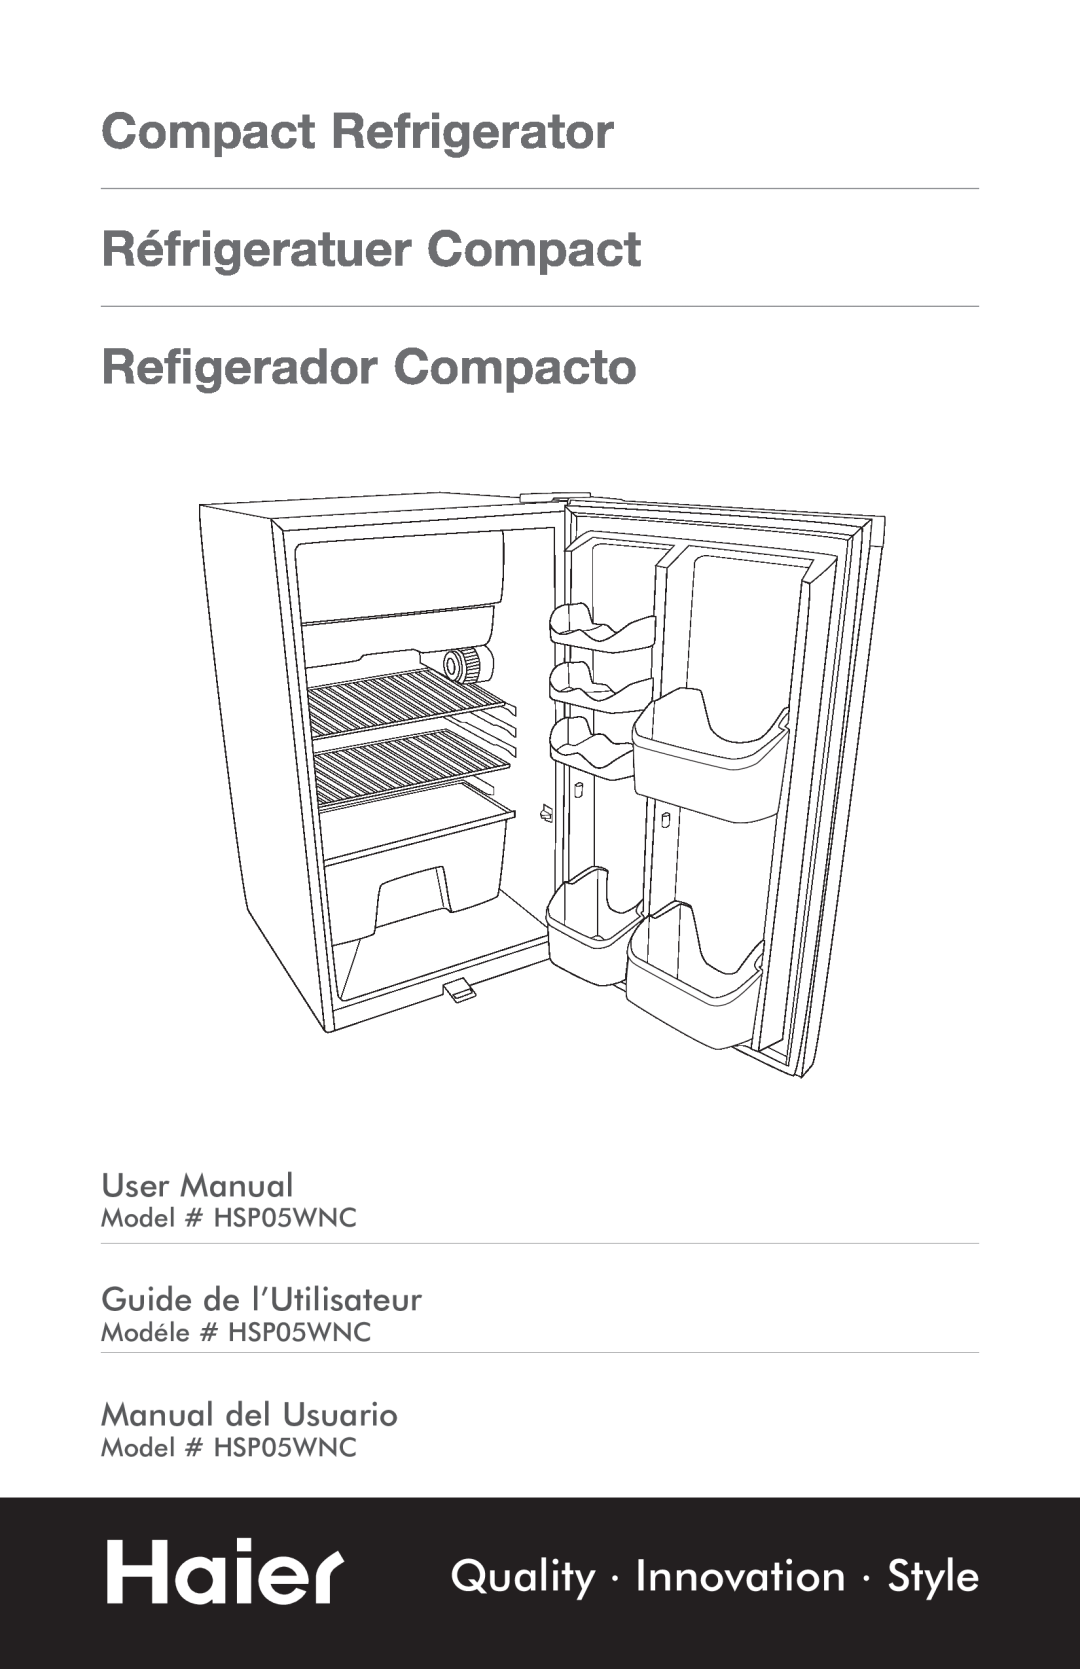 Haier HSP05WNC user manual Compact Refrigerator Réfrigeratuer Compact Refigerador Compacto, Quality Innovation Style 